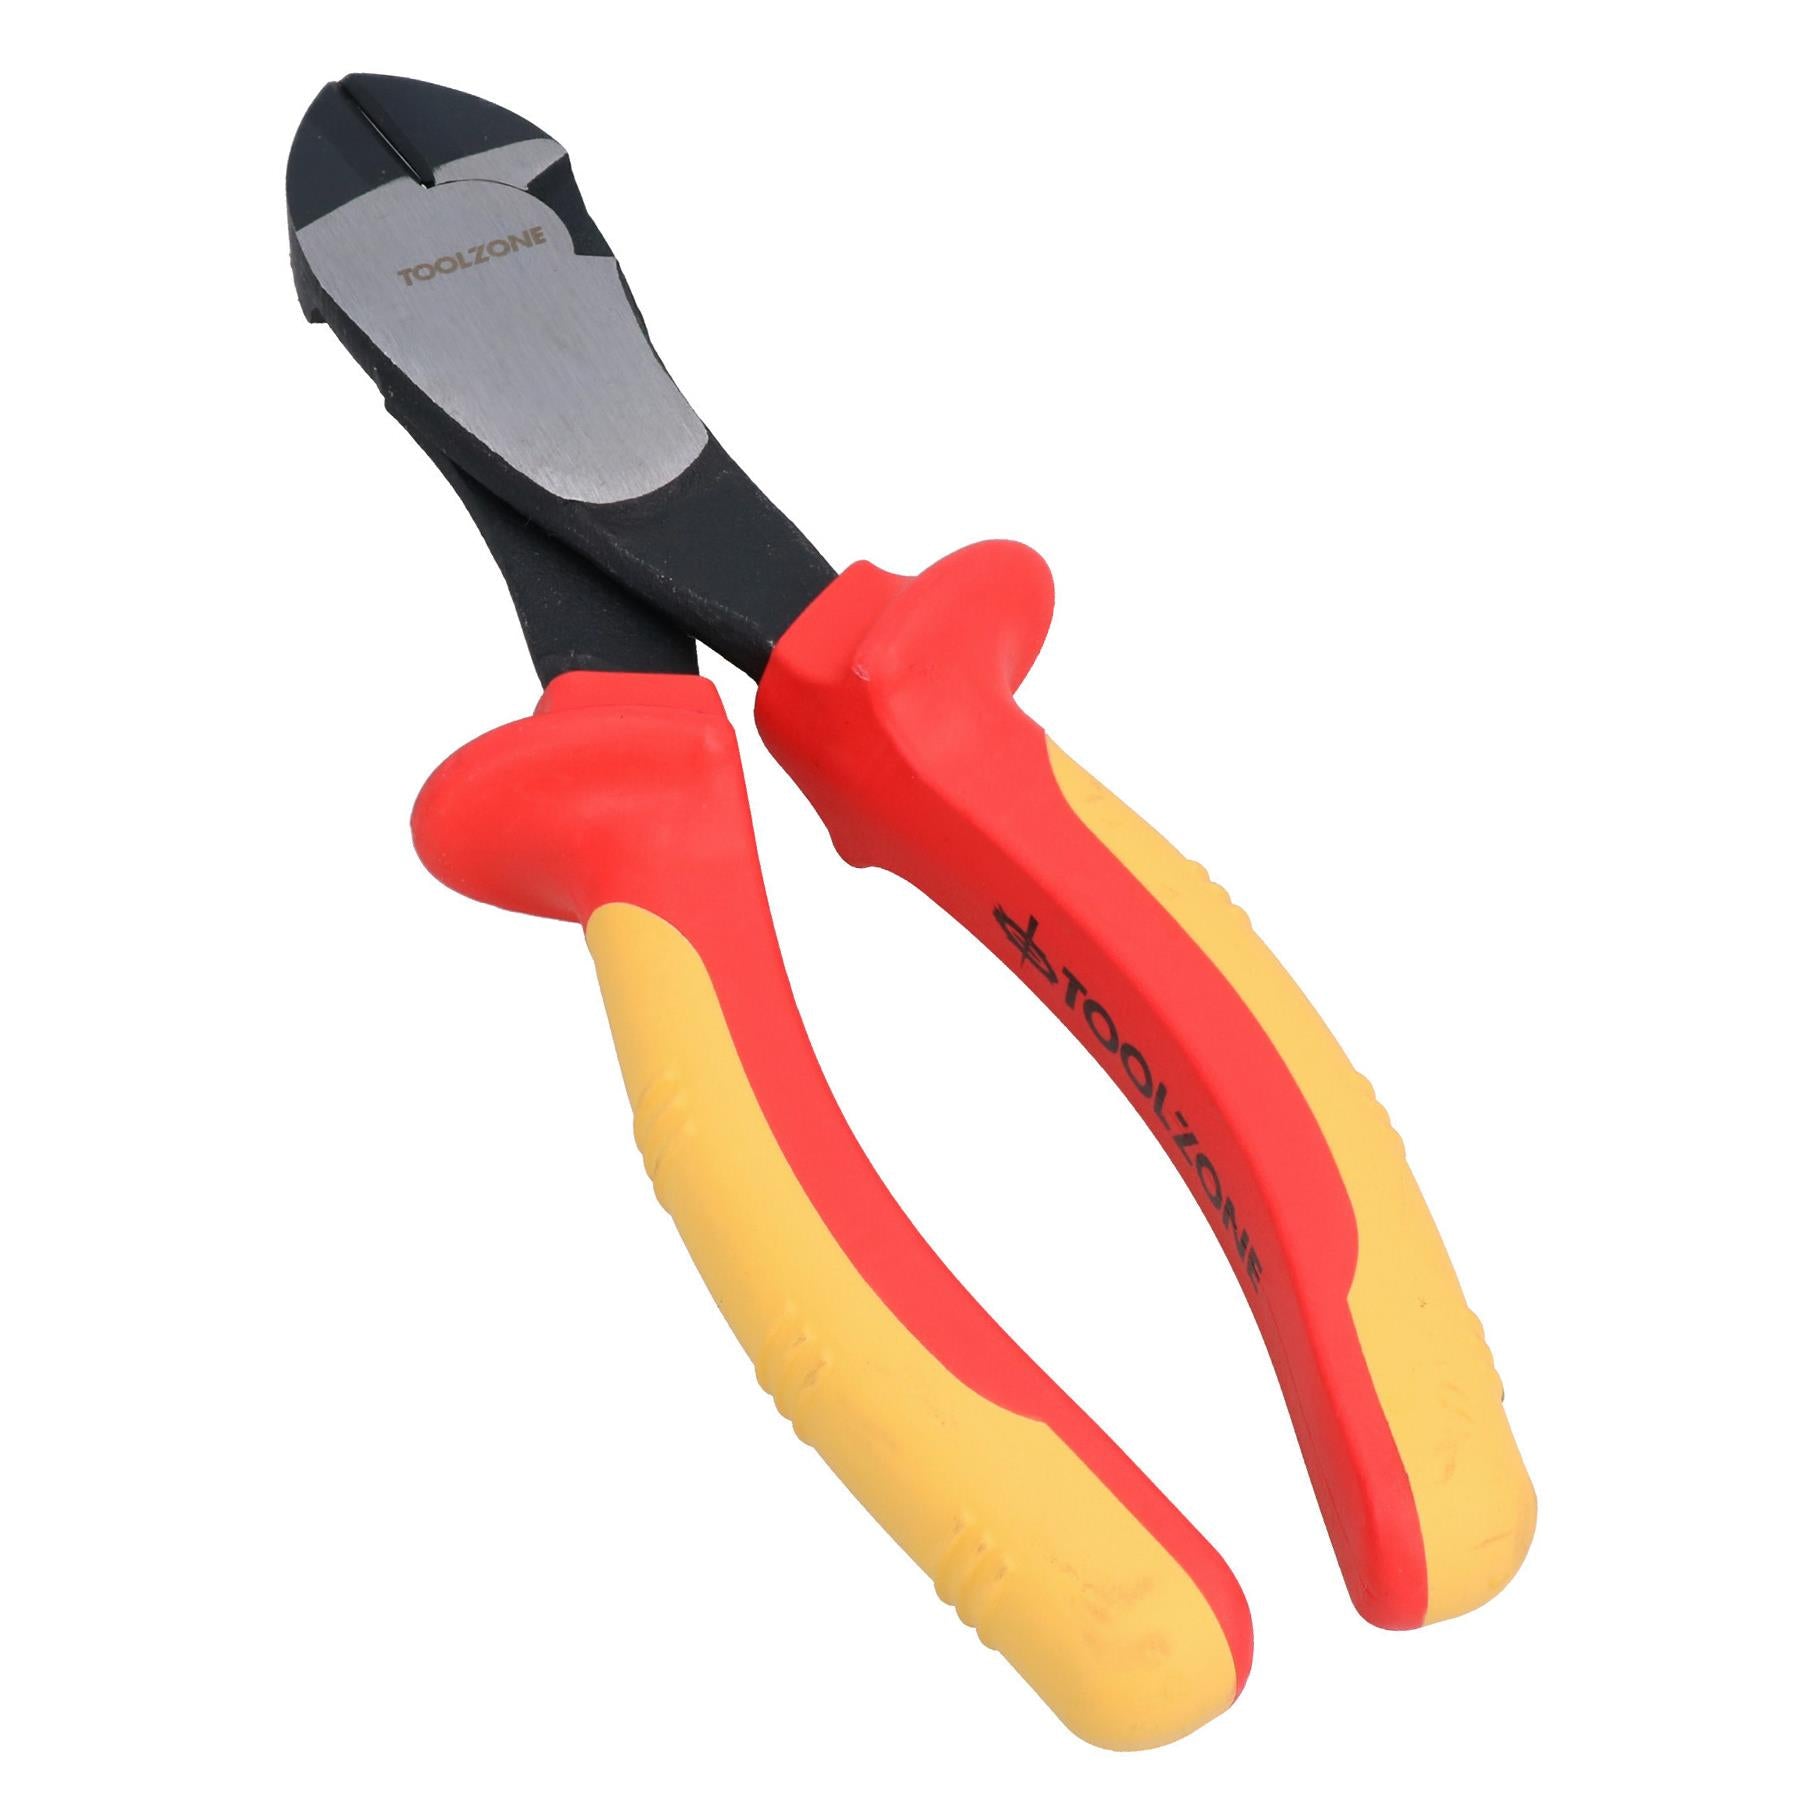 7.5" VDE Electrician Electrical Diagonal Side Wire Cutting Cutter Cut Snips Pliers